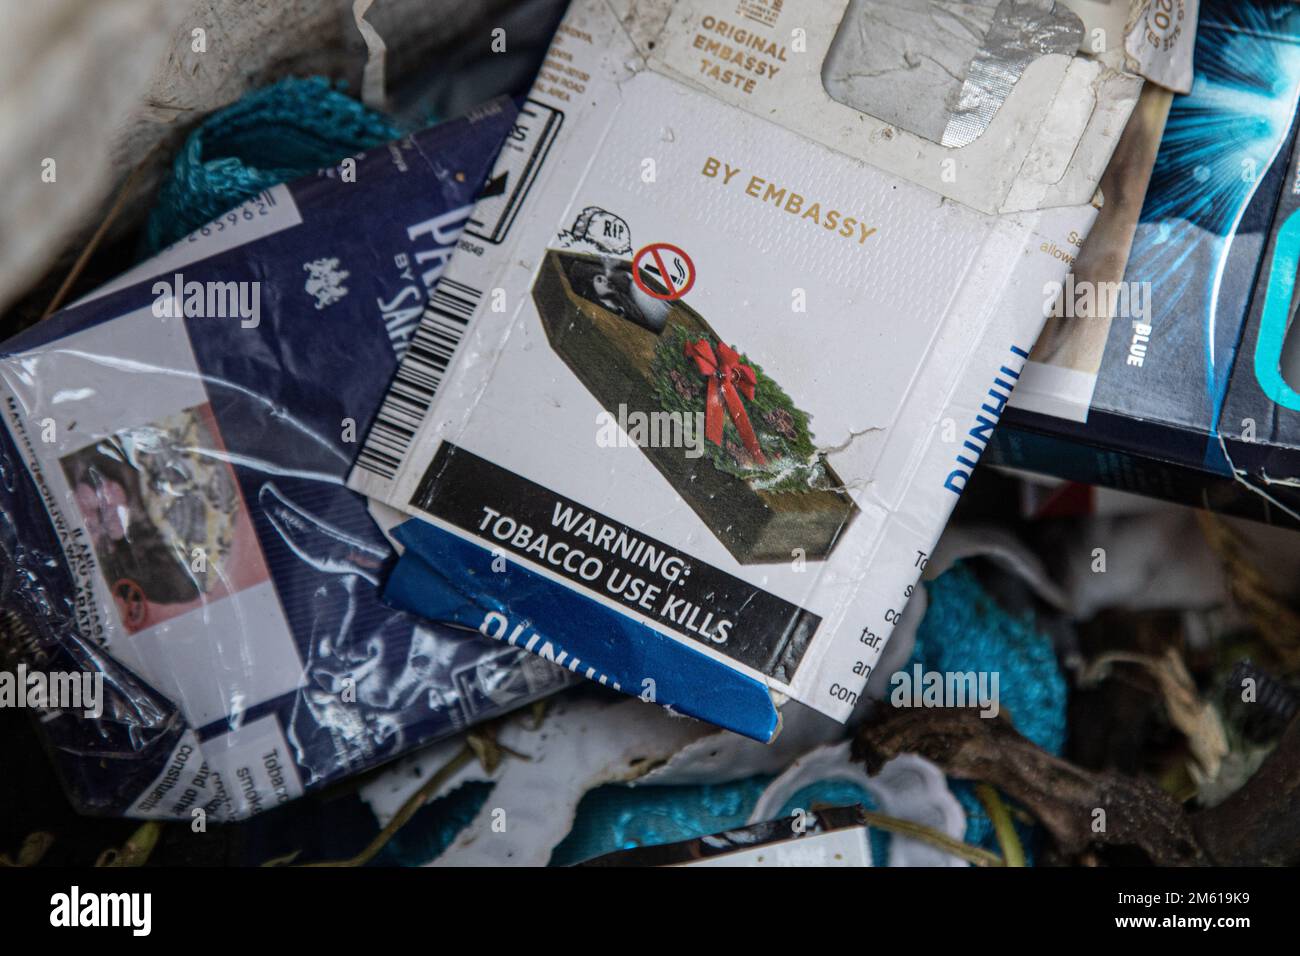 An empty packet of Dunhill Cigarettes with a health warning written 'Tobacco Use Kills' and a coffin symbol printed on it litters the environment near a popular entertainment spot in Nakuru. A study conducted by researchers at California’s UC Davis Comprehensive Cancer Center says nearly half of the deaths from 12 cancers are due to tobacco use. Stock Photo